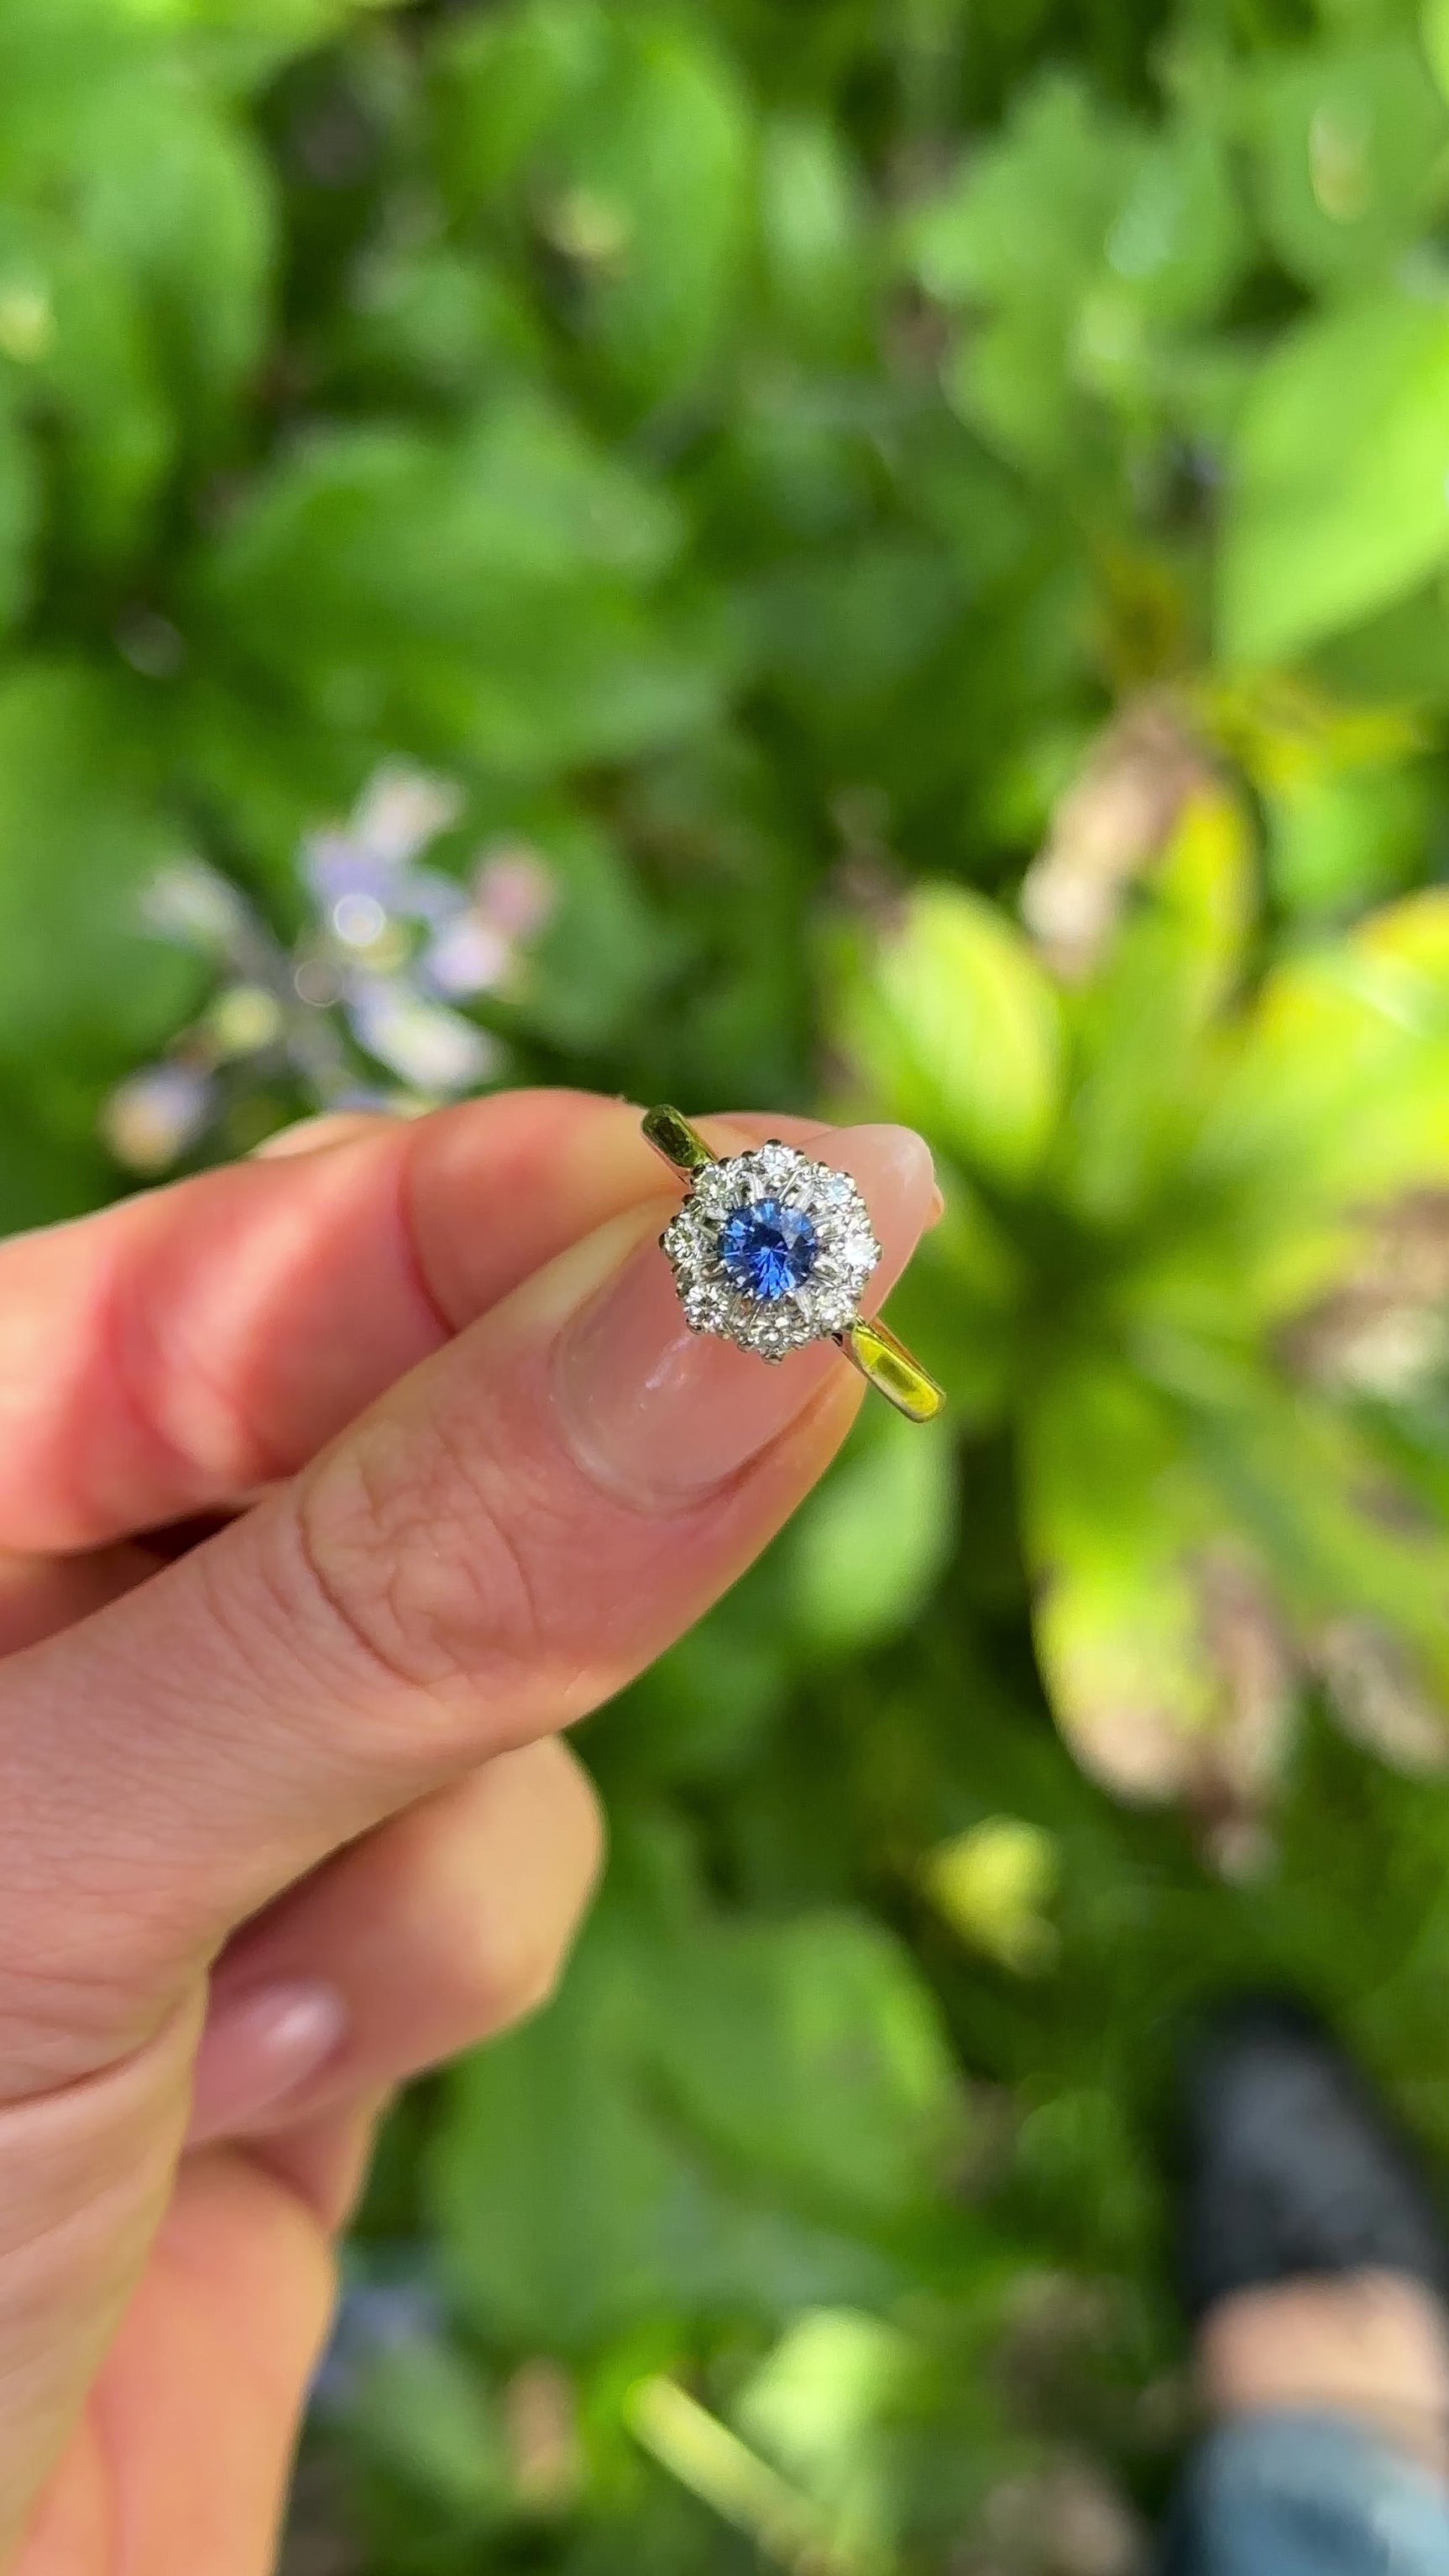 Vintage Sapphire and Diamond Cluster Ring, 18ct Yellow Gold held in fingers.